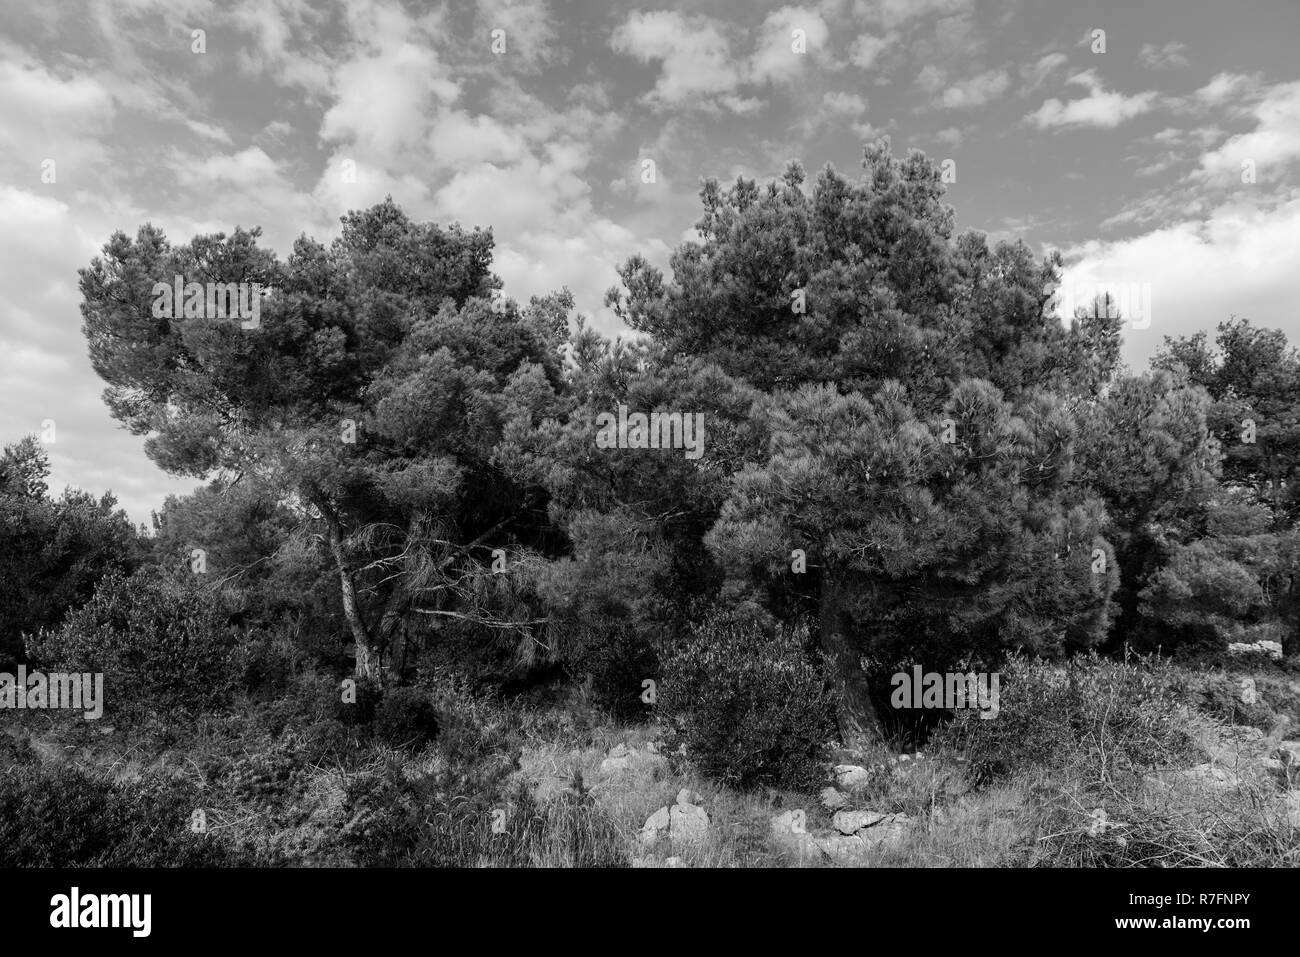 Tall trees in nature with blue sky and clouds. Black and white image. Stock Photo